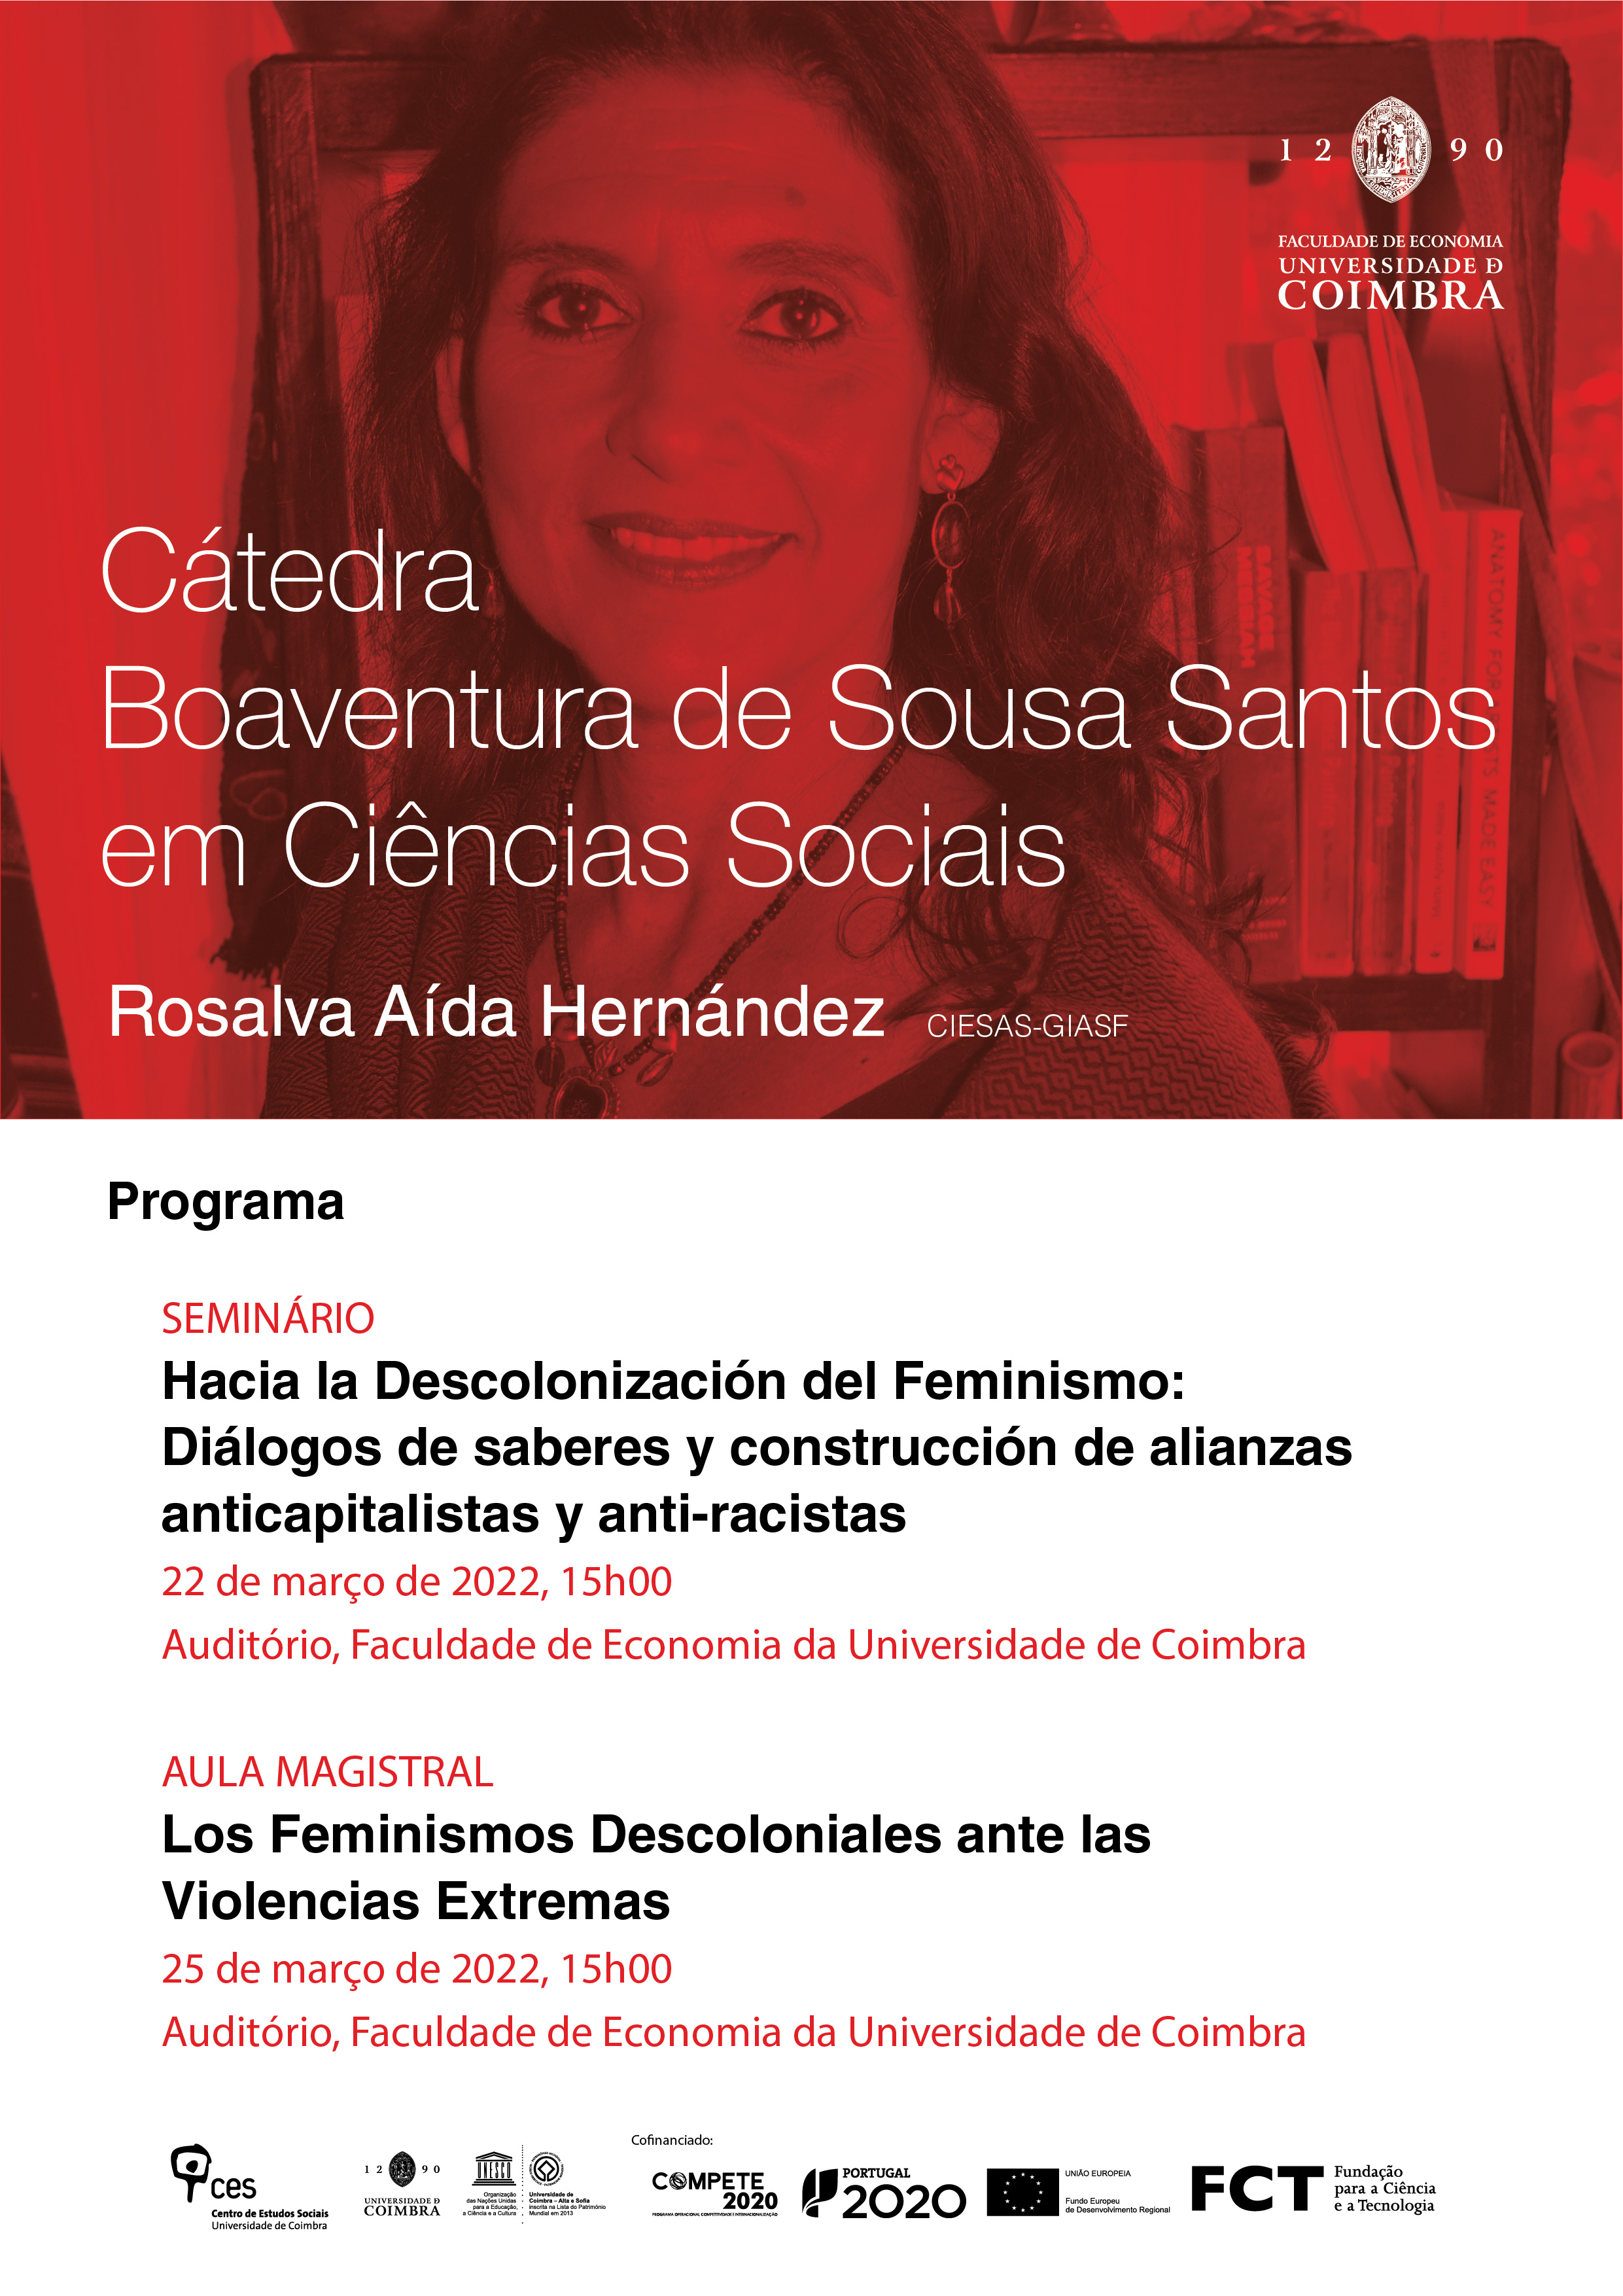 Decolonial Feminisms in the Face of Extreme Violence<span id="edit_29169"><script>$(function() { $('#edit_29169').load( "/myces/user/editobj.php?tipo=evento&id=29169" ); });</script></span>